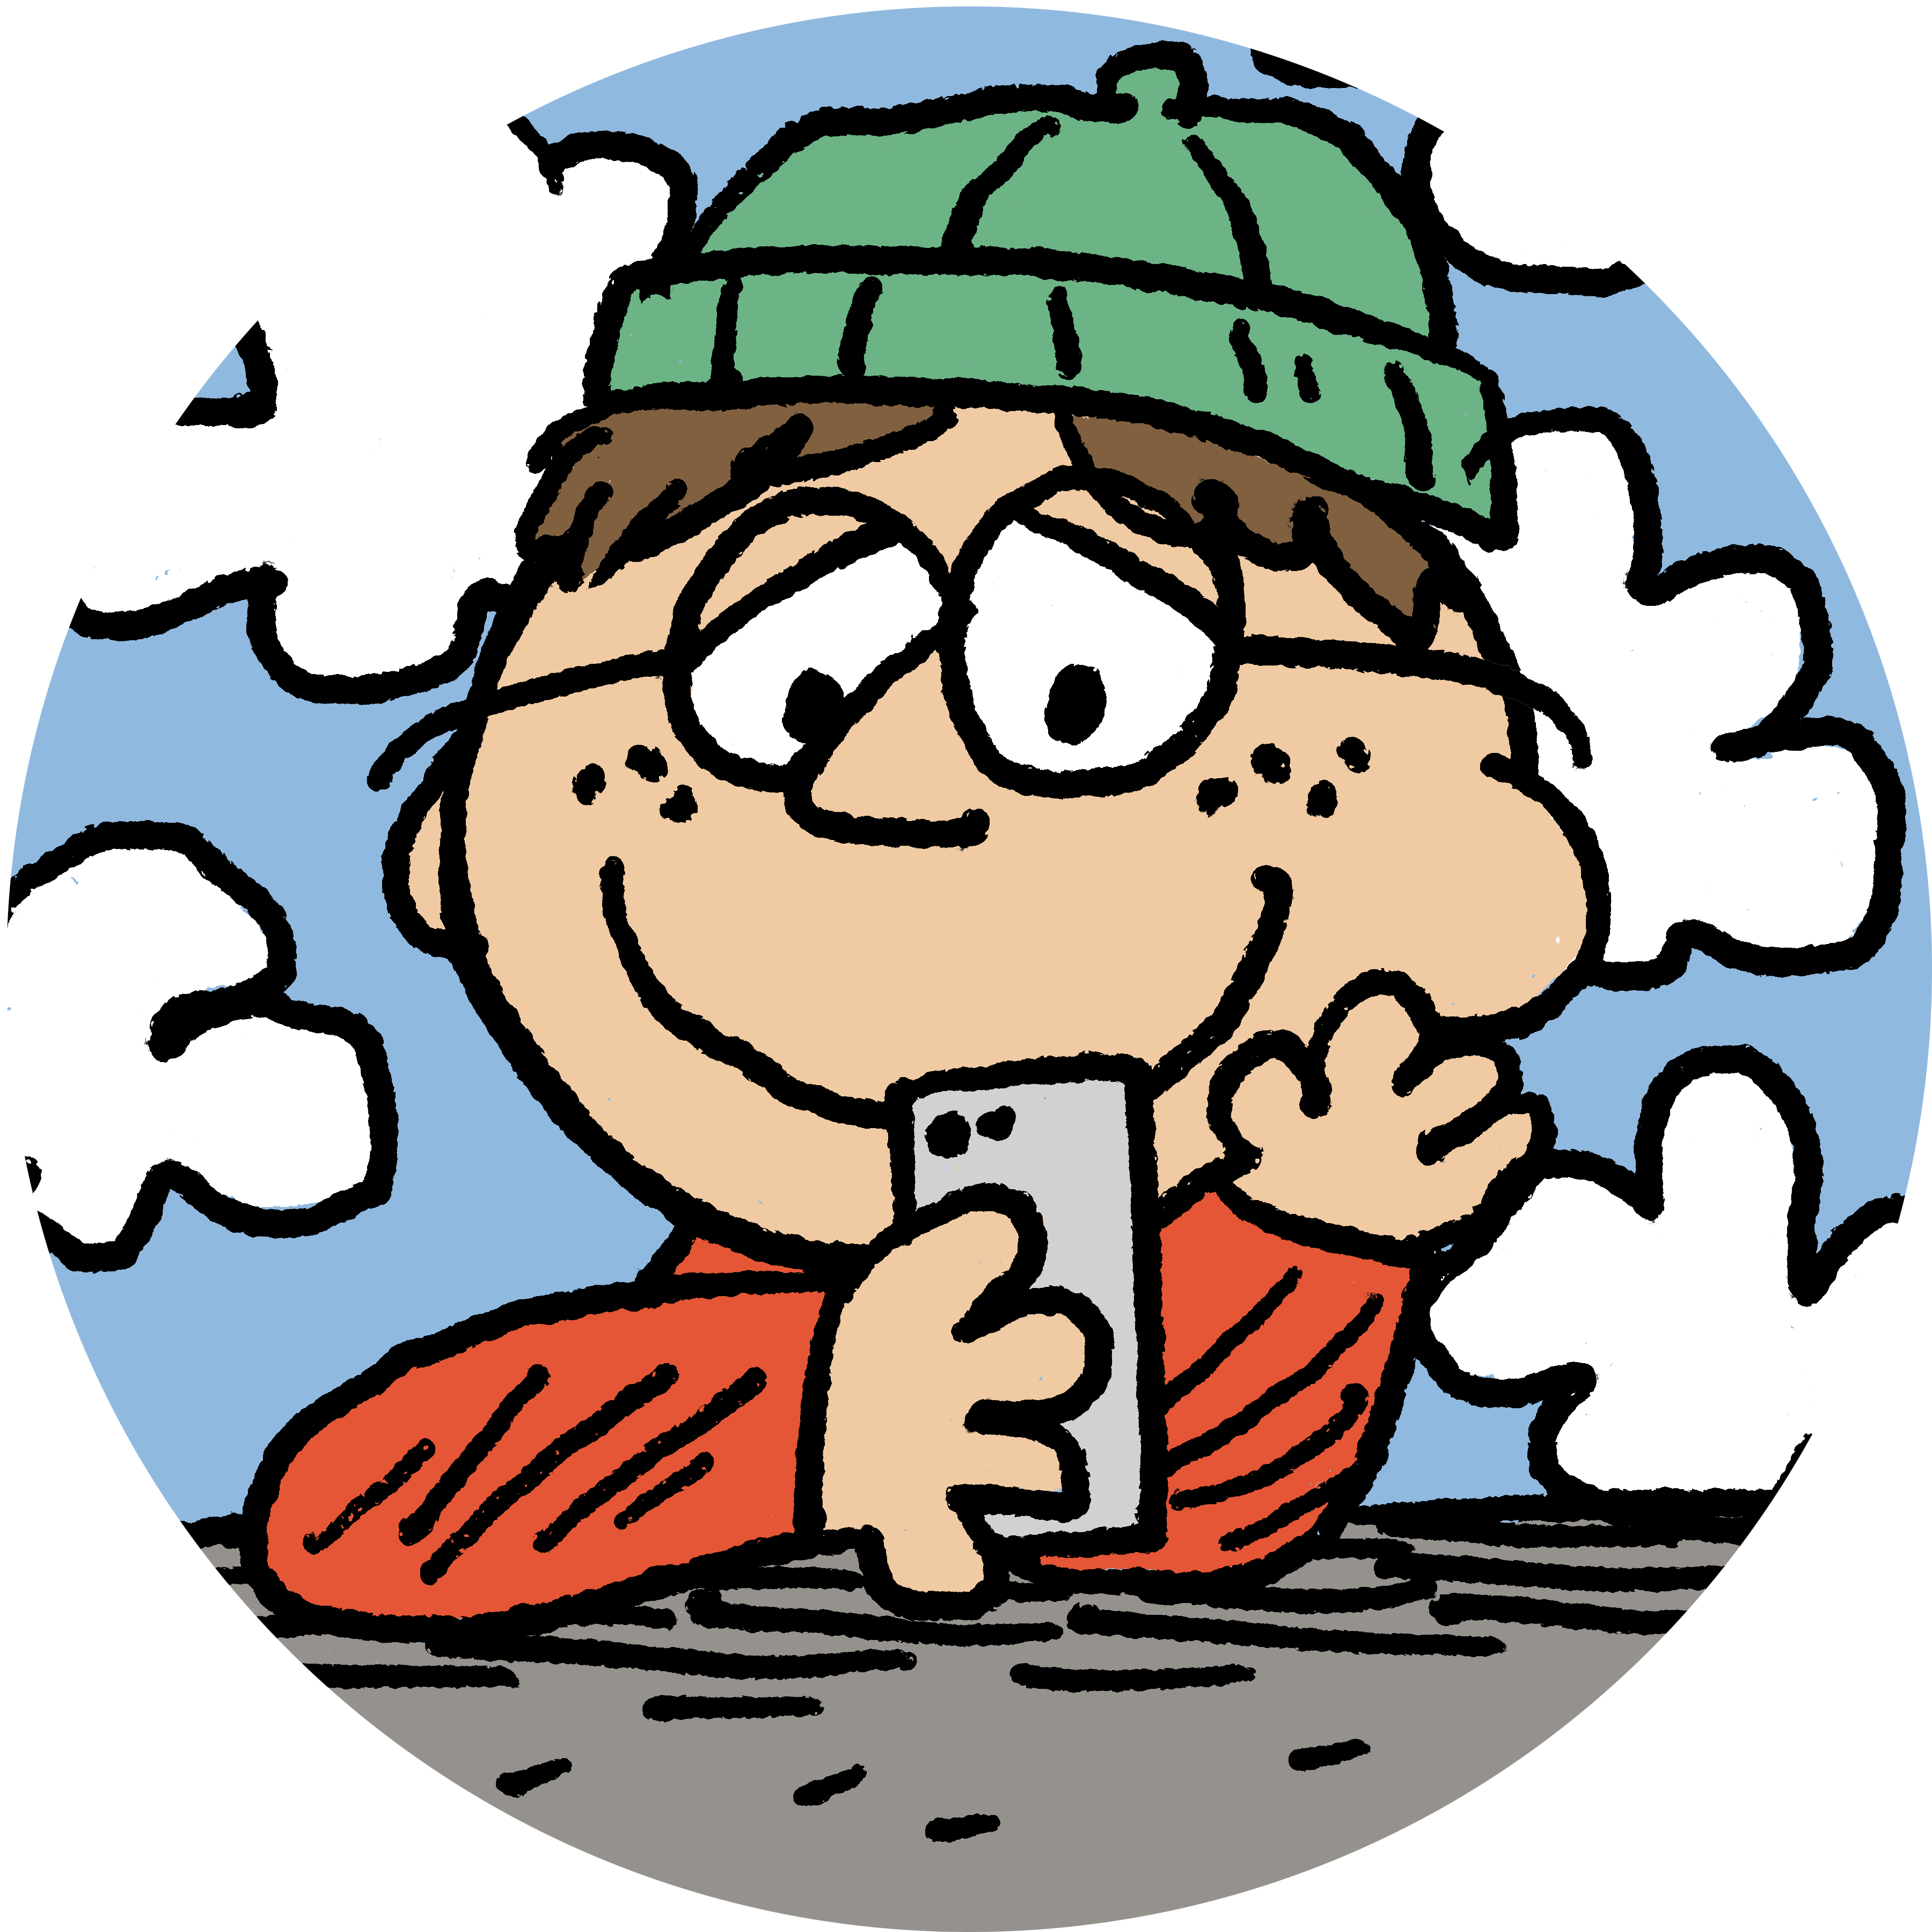 digital illustration of Evan in the style of Charlie Brown, smiling while staring at his phone held in his right hand